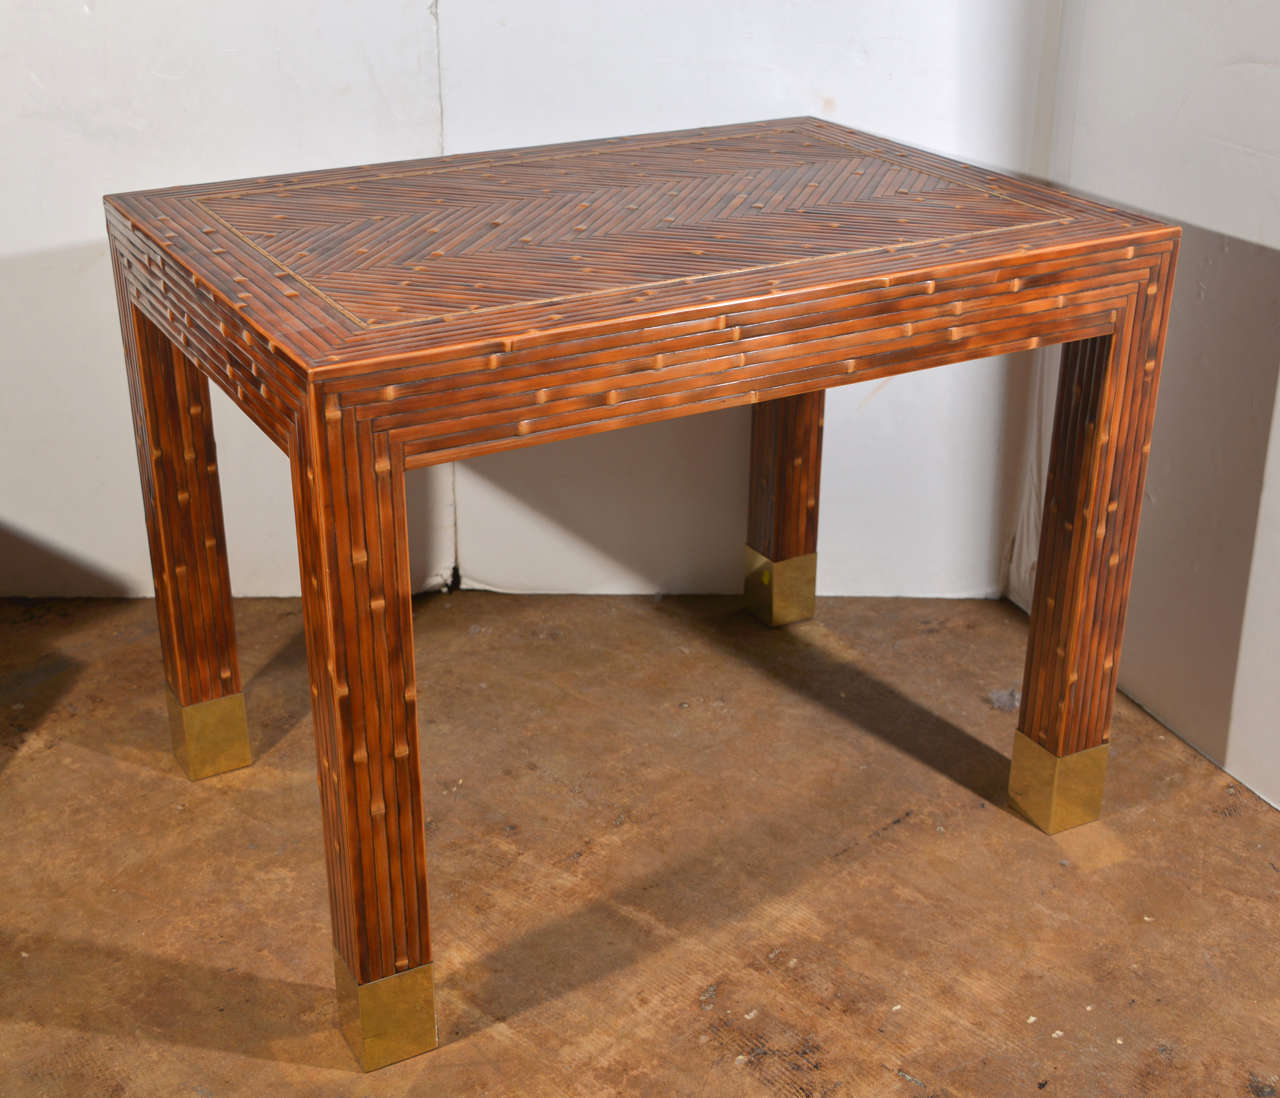 Classic Flint Harrison original condition stylish game table.  Nice mellow patina and contrast.  Superb craftsmanship.  Custom speckled bamboo with brass sabots.  Functional as corner or lamp table and small desk.

Founded in 1976, Flint Harrison